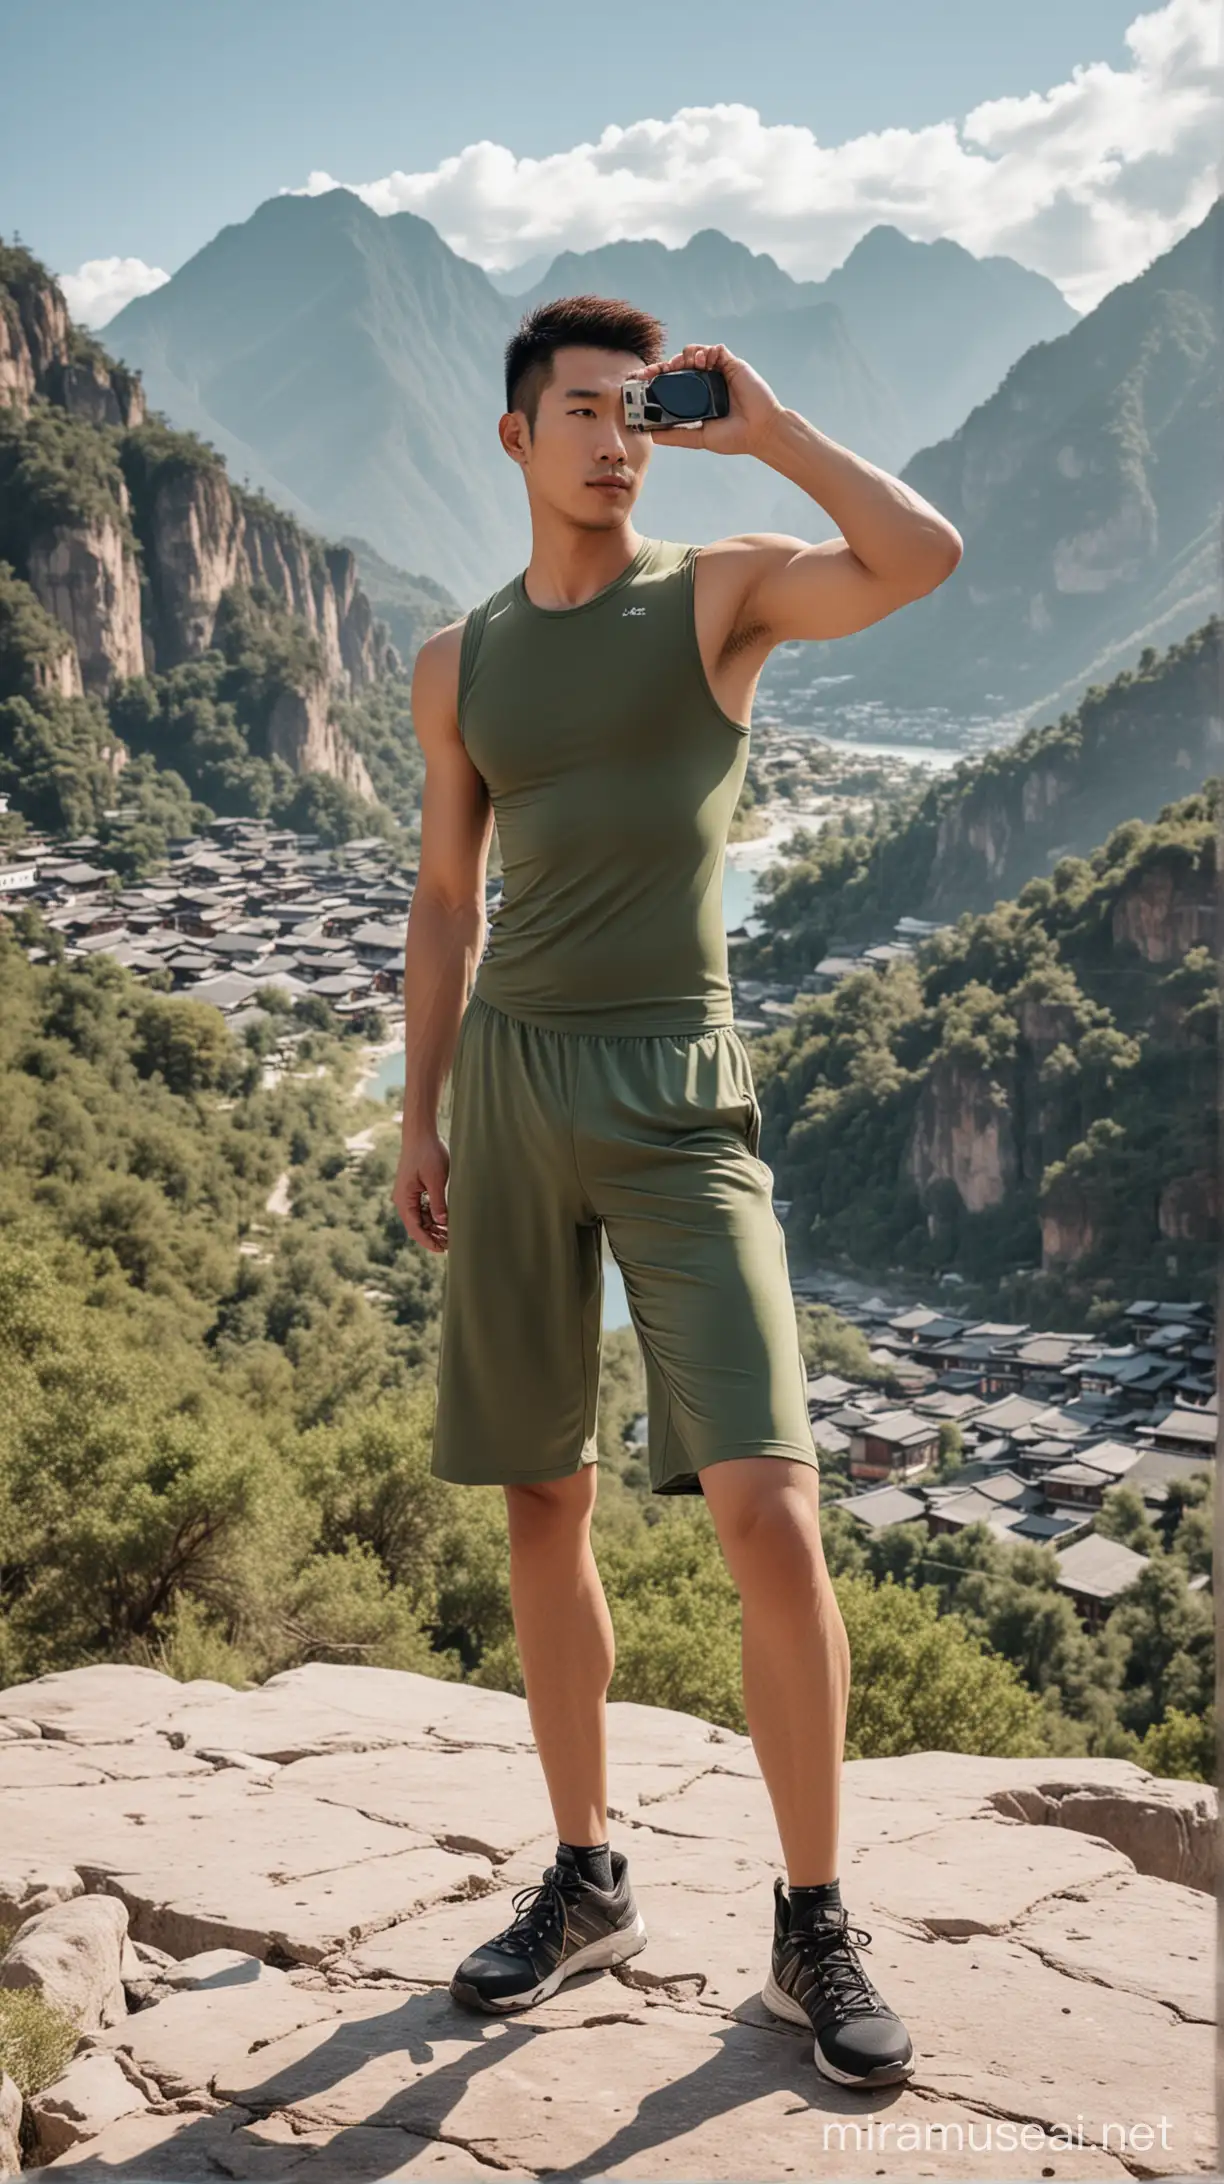 Chinese Man in Tight Sportswear Capturing Photos at Lijiang Scenic Area